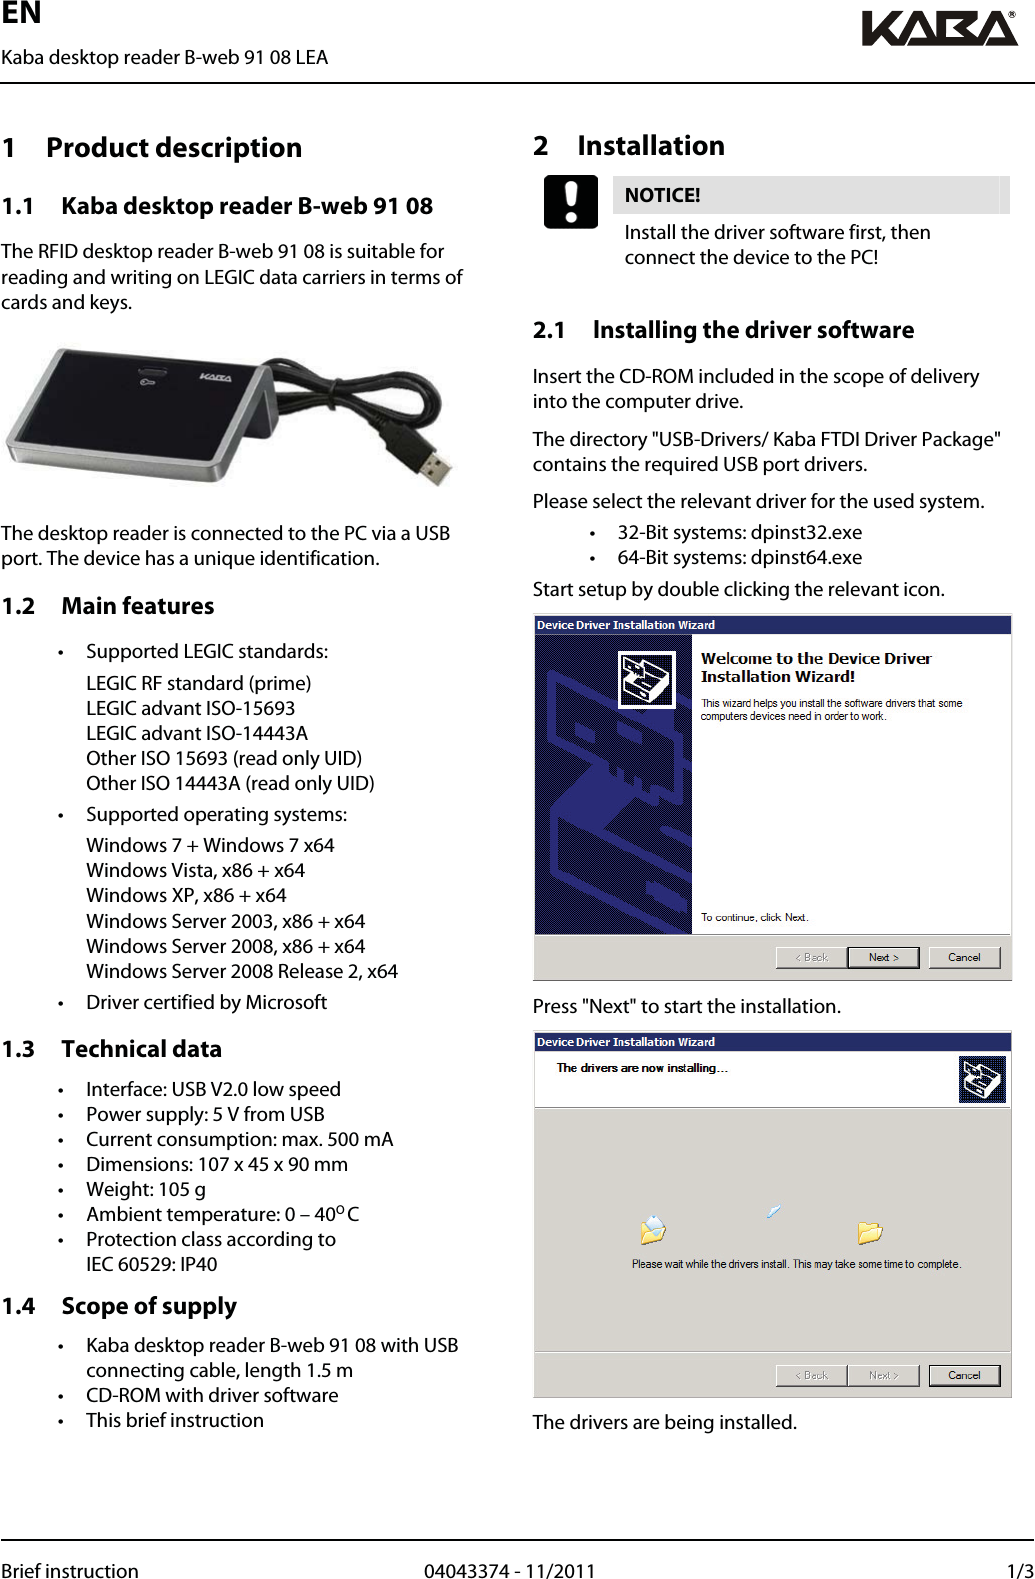 EN Kaba desktop reader B-web 91 08 LEA  Brief instruction  04043374 - 11/2011  1/31 Product description 1.1 Kaba desktop reader B-web 91 08 The RFID desktop reader B-web 91 08 is suitable for reading and writing on LEGIC data carriers in terms of cards and keys.  The desktop reader is connected to the PC via a USB port. The device has a unique identification. 1.2 Main features •  Supported LEGIC standards:  LEGIC RF standard (prime) LEGIC advant ISO-15693 LEGIC advant ISO-14443A Other ISO 15693 (read only UID) Other ISO 14443A (read only UID) •  Supported operating systems:   Windows 7 + Windows 7 x64 Windows Vista, x86 + x64 Windows XP, x86 + x64 Windows Server 2003, x86 + x64 Windows Server 2008, x86 + x64 Windows Server 2008 Release 2, x64 •  Driver certified by Microsoft 1.3 Technical data •  Interface: USB V2.0 low speed •  Power supply: 5 V from USB •  Current consumption: max. 500 mA •  Dimensions: 107 x 45 x 90 mm •  Weight: 105 g •  Ambient temperature: 0 – 40O C •  Protection class according to  IEC 60529: IP40 1.4 Scope of supply •  Kaba desktop reader B-web 91 08 with USB connecting cable, length 1.5 m •  CD-ROM with driver software •  This brief instruction   2 Installation NOTICE!  Install the driver software first, then connect the device to the PC!  2.1 Installing the driver software Insert the CD-ROM included in the scope of delivery into the computer drive. The directory &quot;USB-Drivers/ Kaba FTDI Driver Package&quot; contains the required USB port drivers. Please select the relevant driver for the used system. •  32-Bit systems: dpinst32.exe •  64-Bit systems: dpinst64.exe Start setup by double clicking the relevant icon.  Press &quot;Next&quot; to start the installation.  The drivers are being installed.  